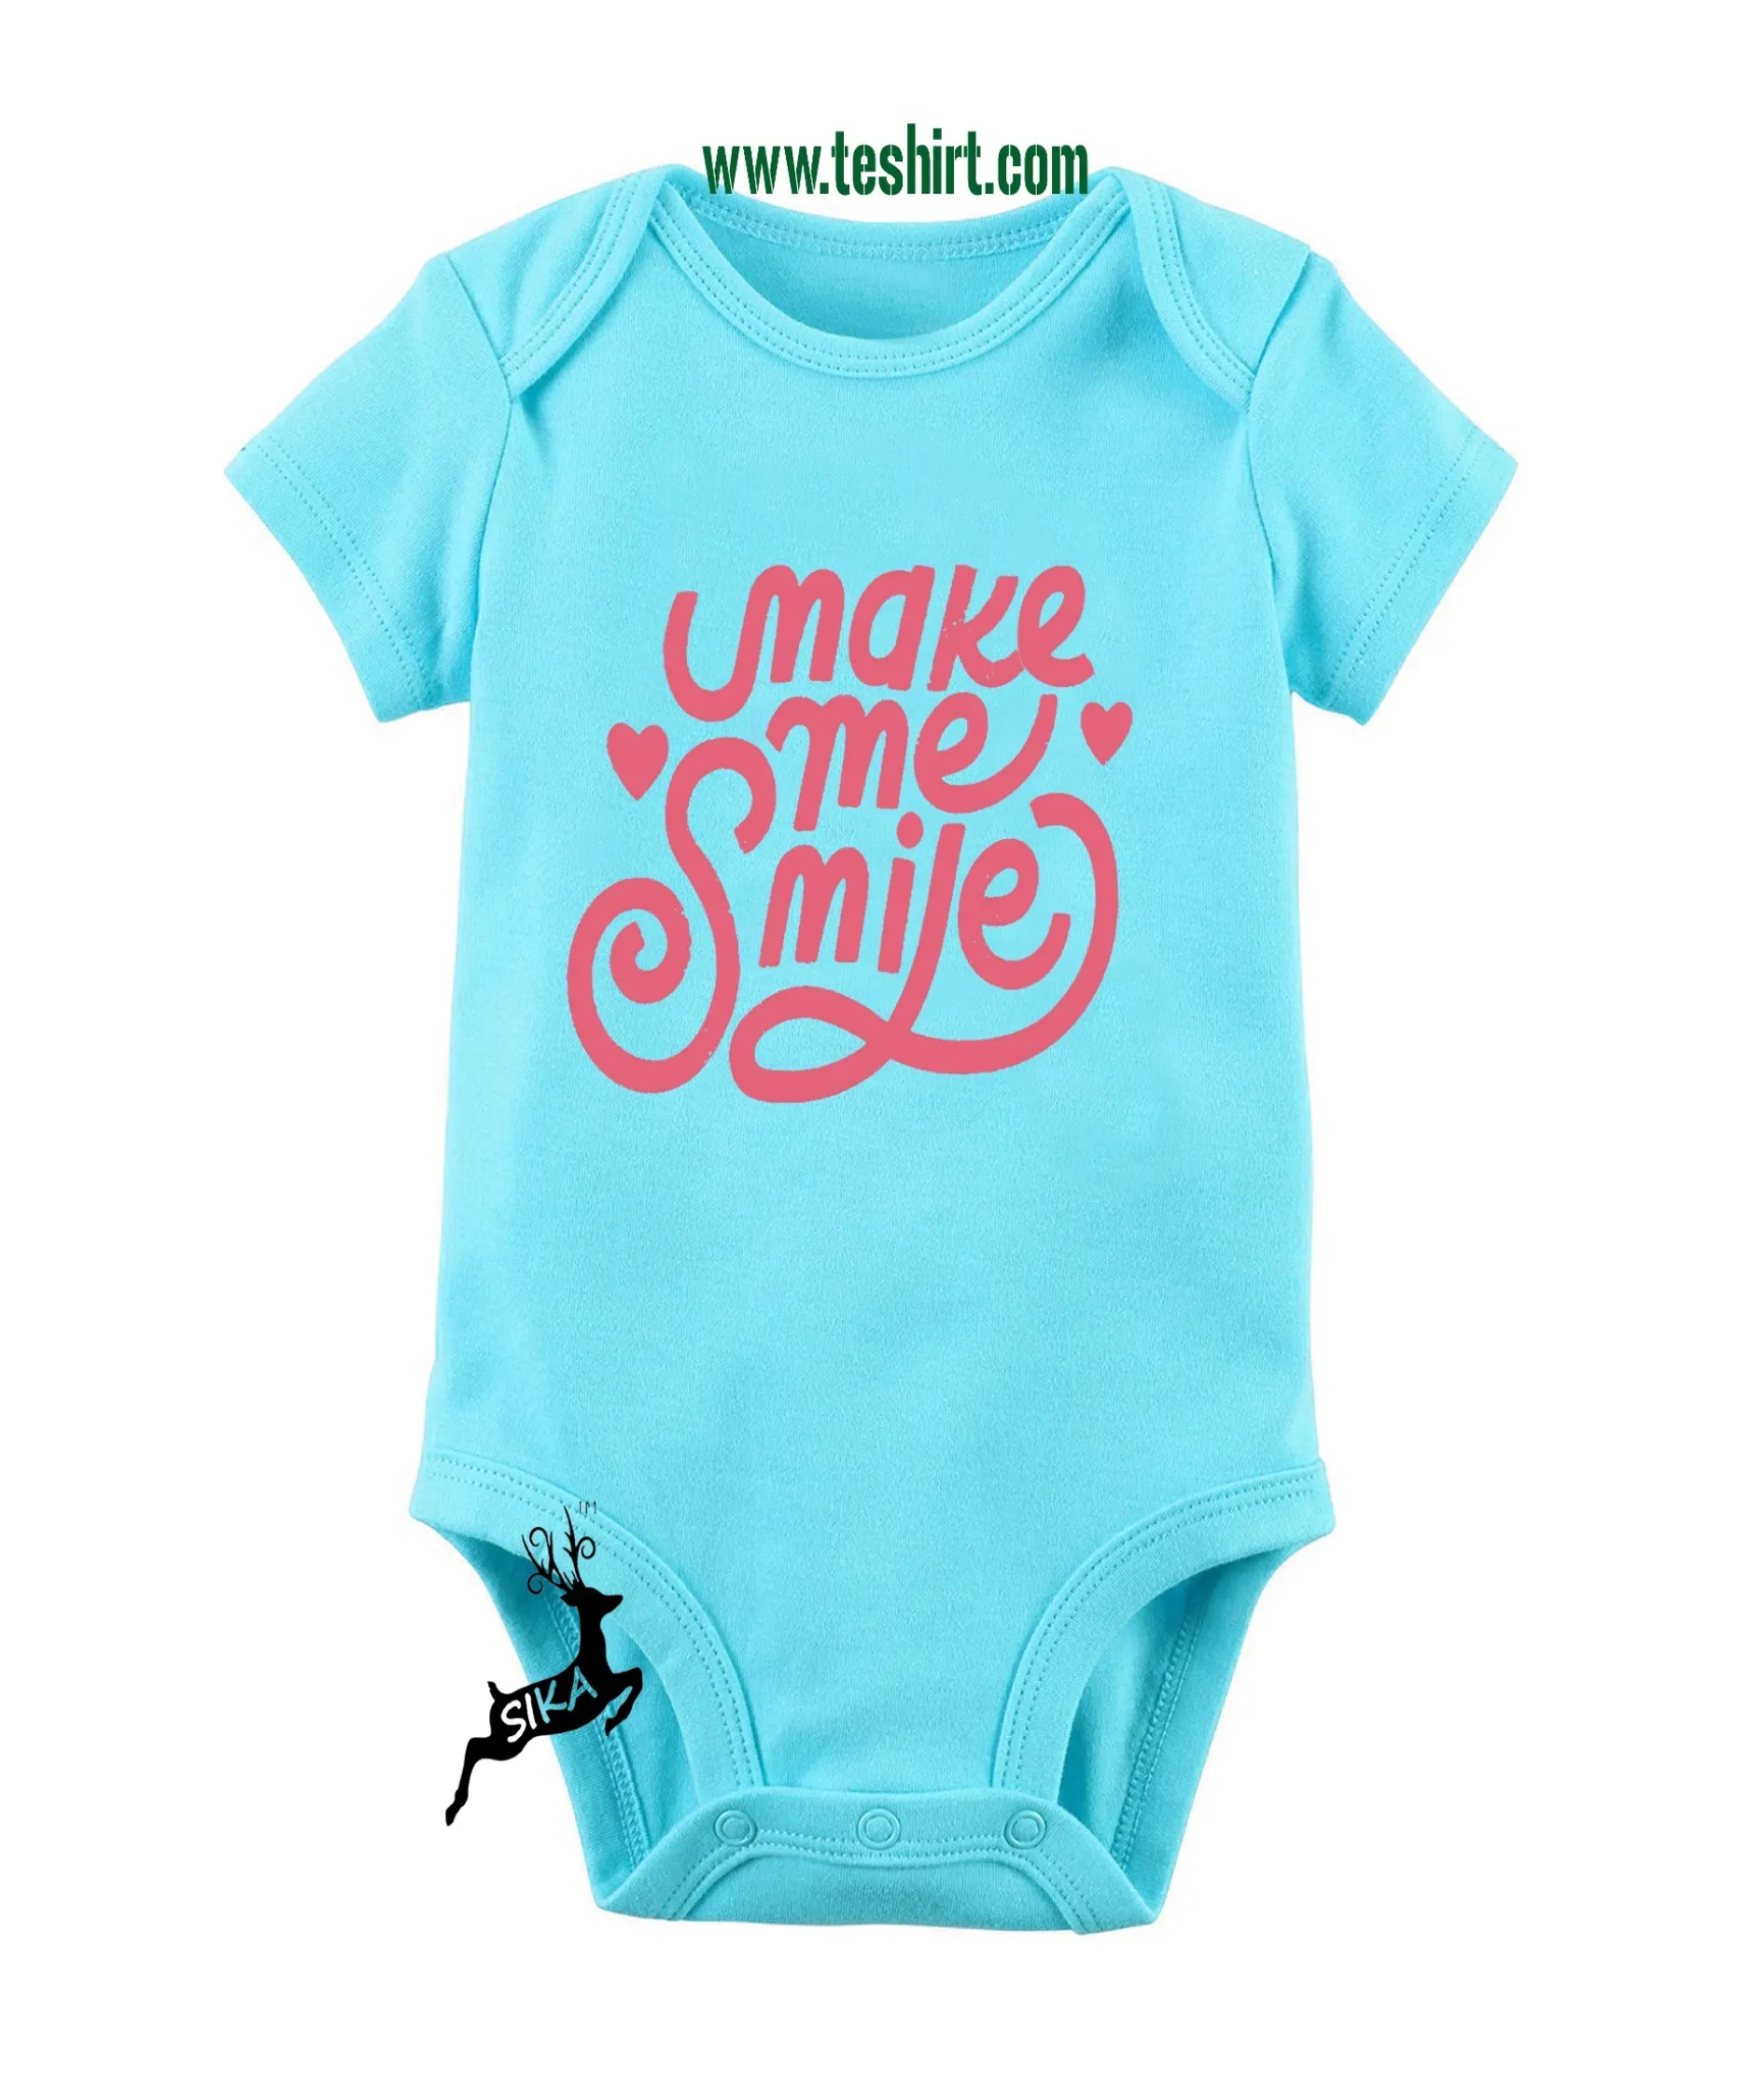 Fast Delivery Custom Print 100% Cotton Toddler Baby Boy Cotton Printed Baby Wear Kids clothes Fashionable baby clothes romper